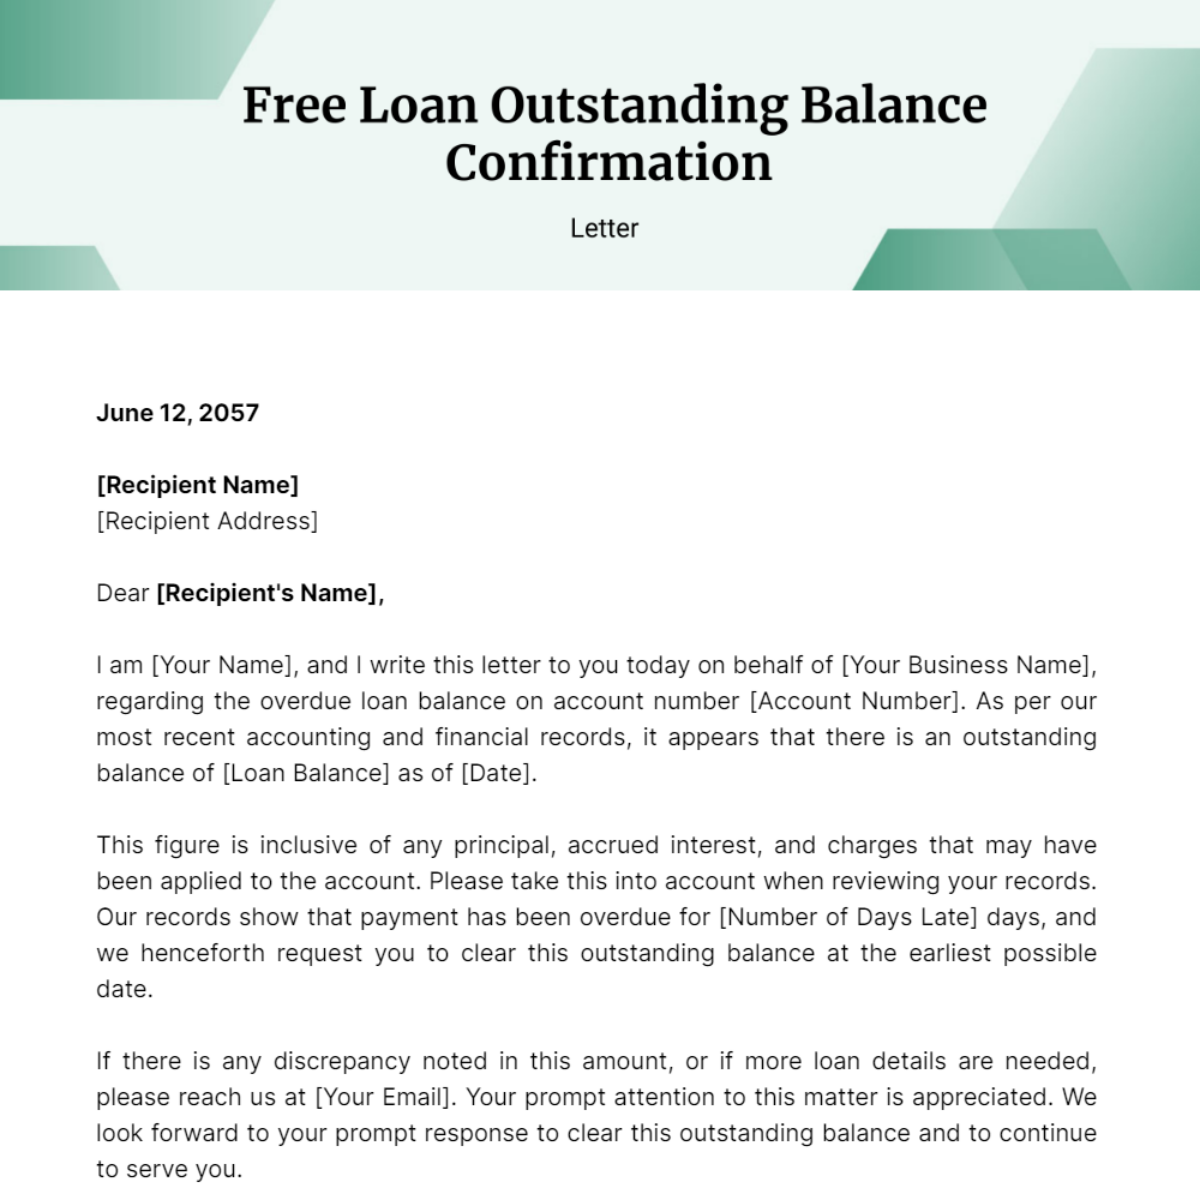 Loan Outstanding Balance Confirmation Letter Template